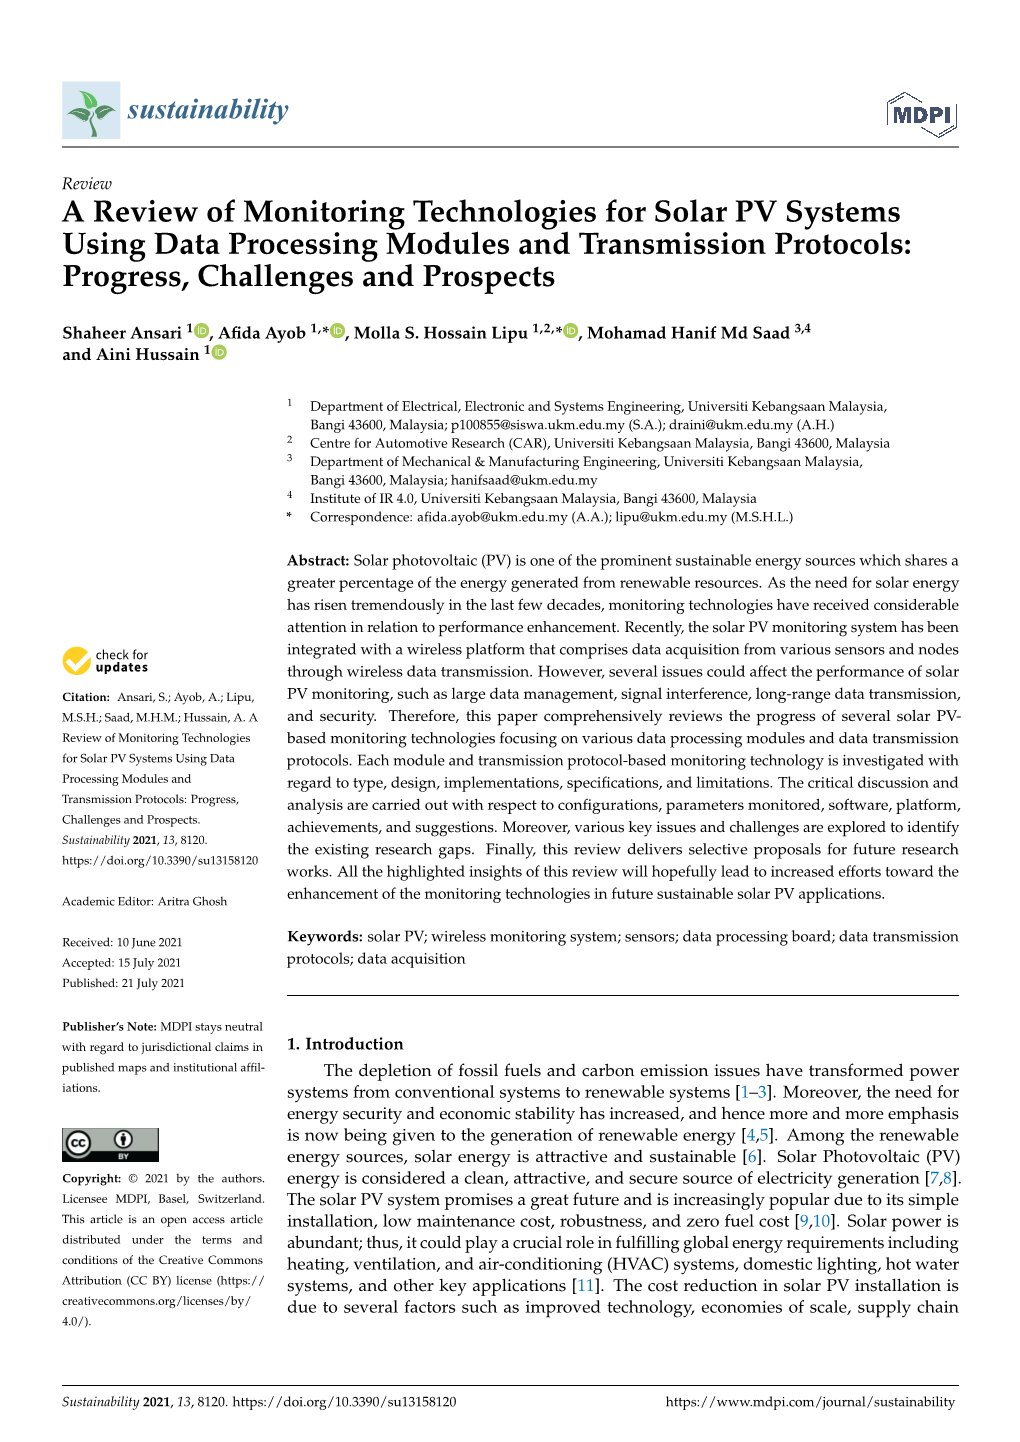 A Review of Monitoring Technologies for Solar PV Systems Using Data Processing Modules and Transmission Protocols: Progress, Challenges and Prospects